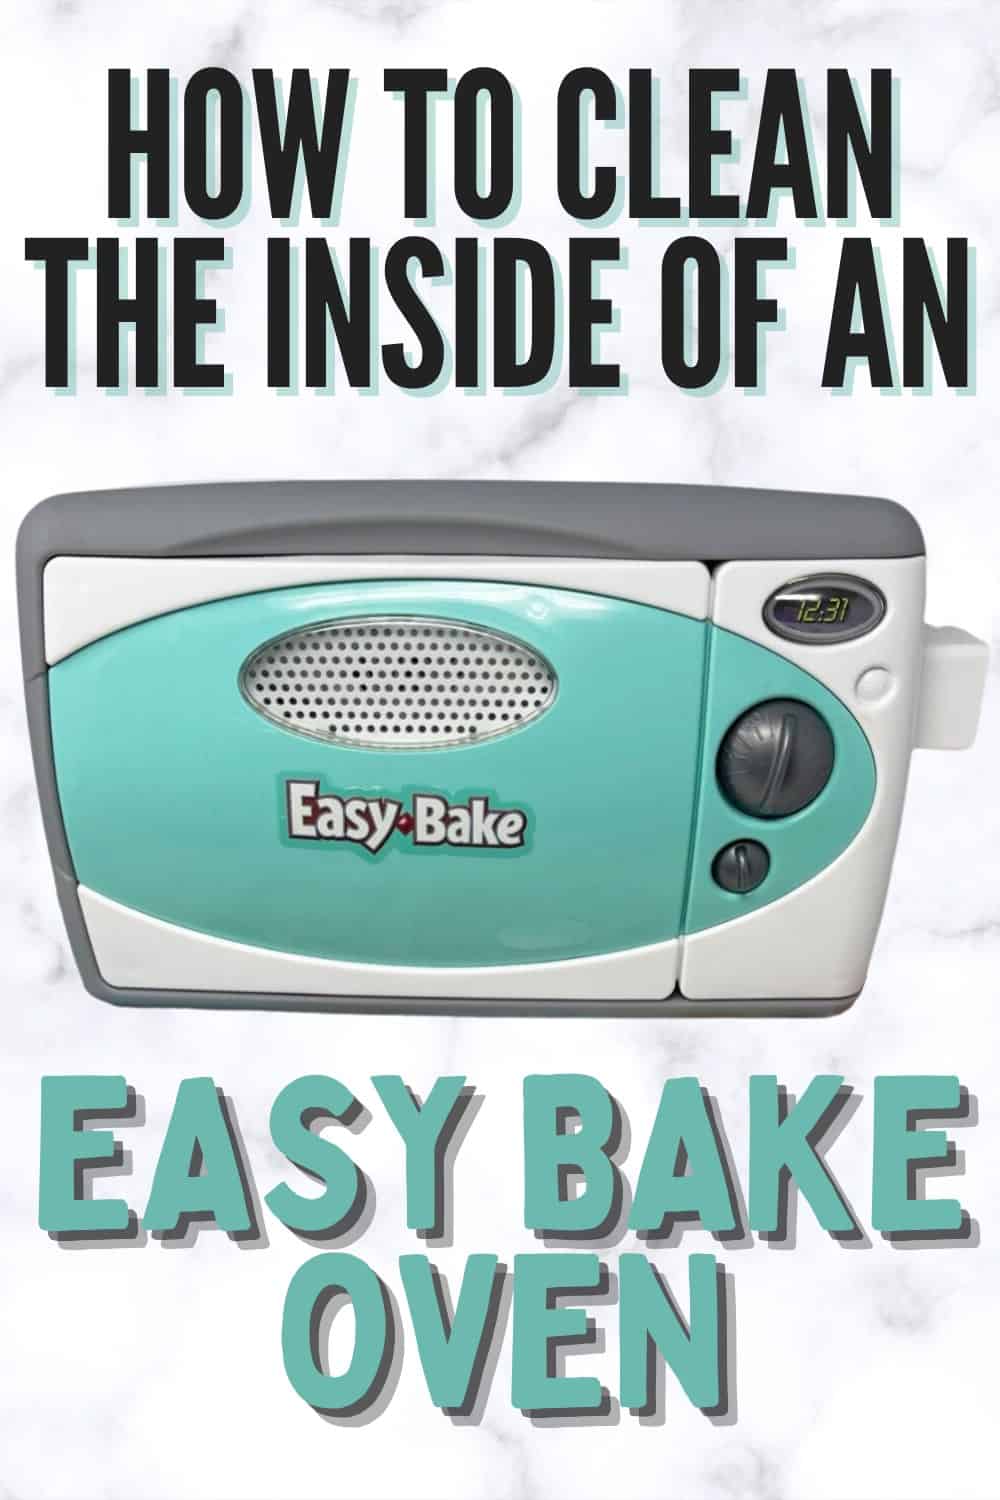 Use dish soap and water to clean inside an easy bake oven